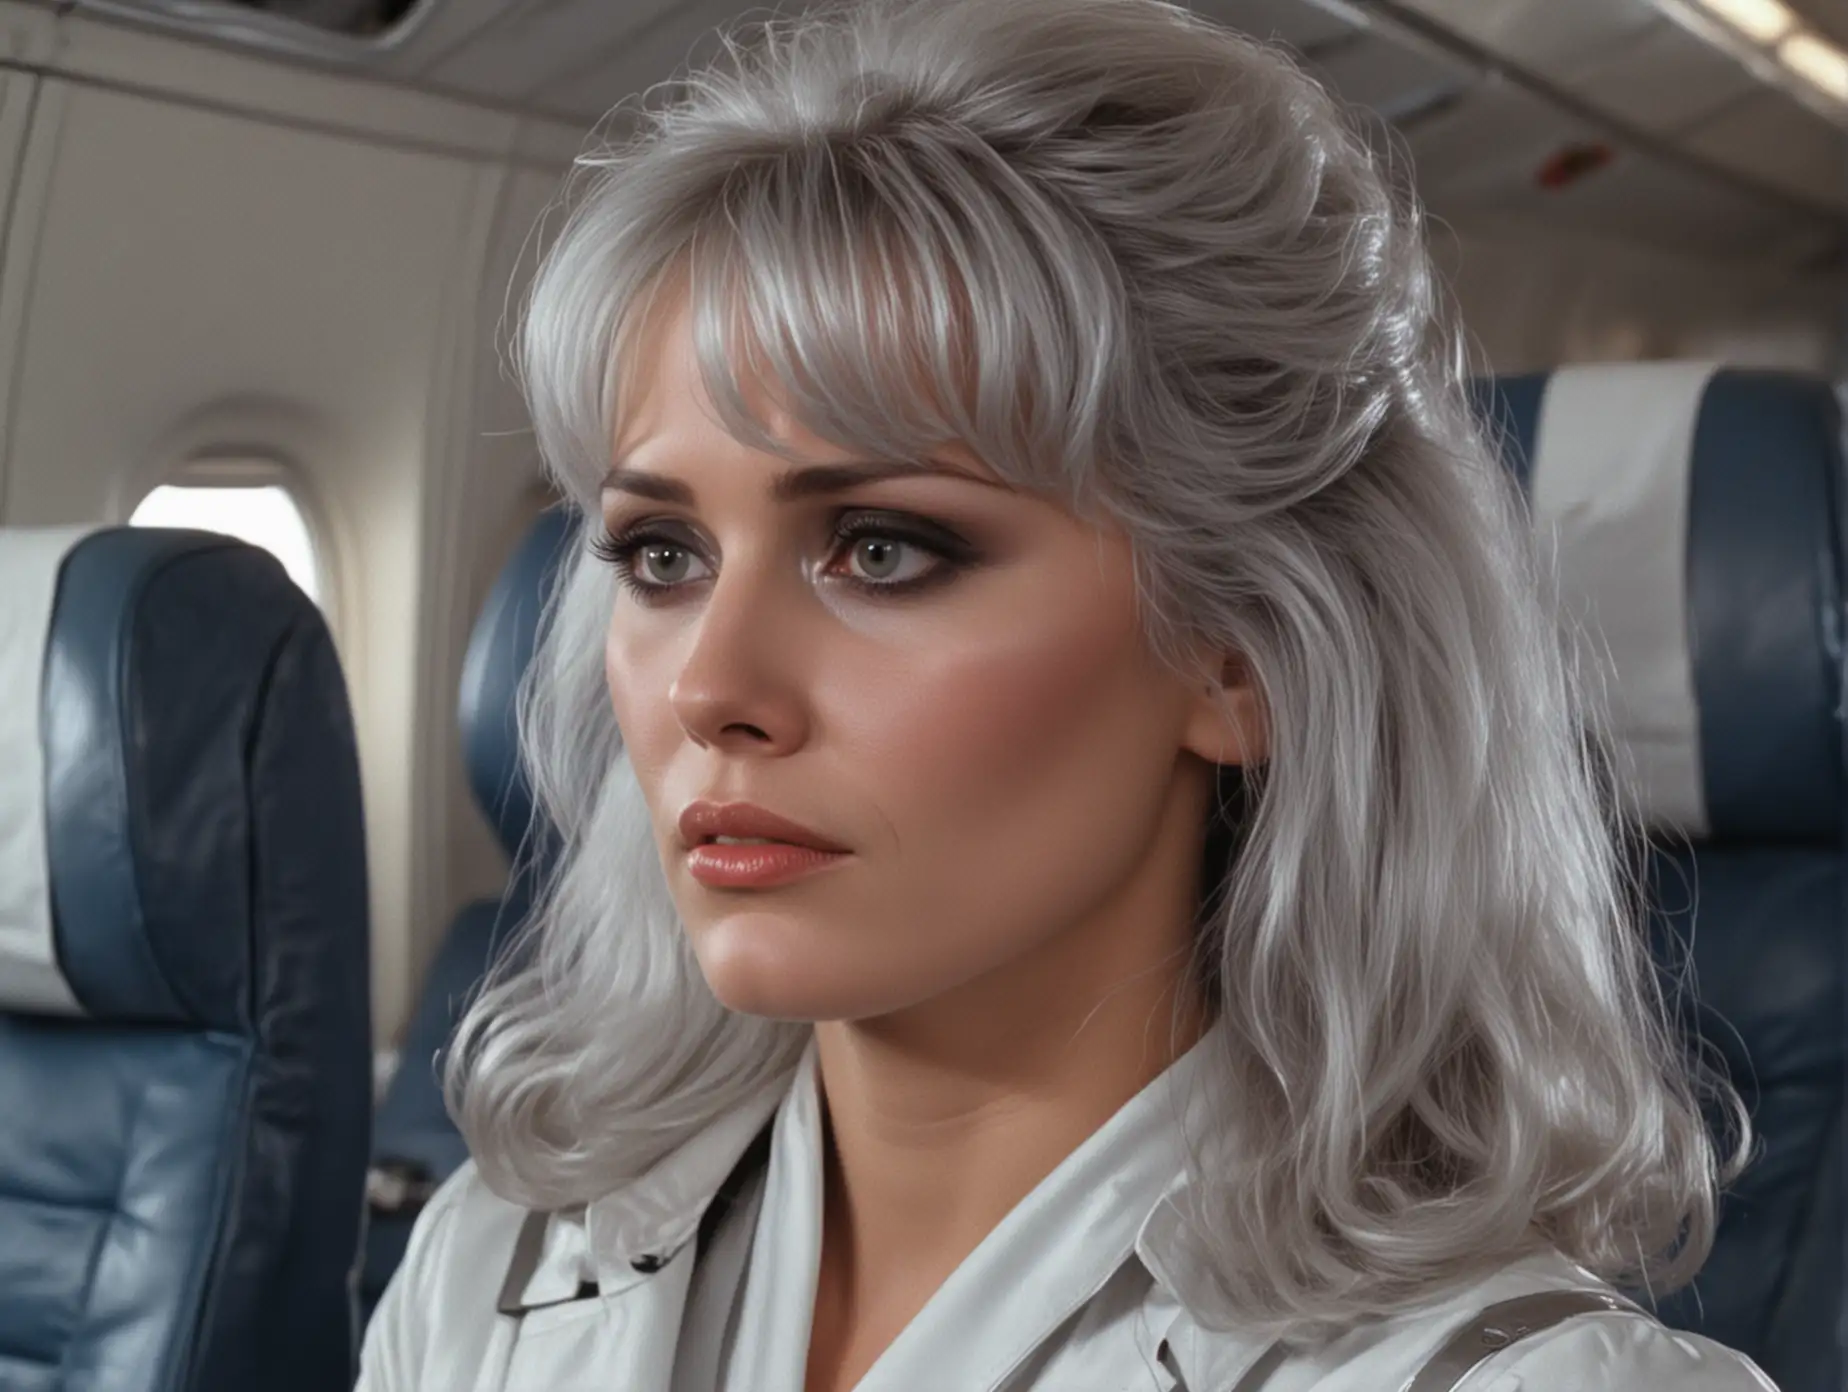 1980s SciFi Scene Silver Ladys Sadness on an Airplane